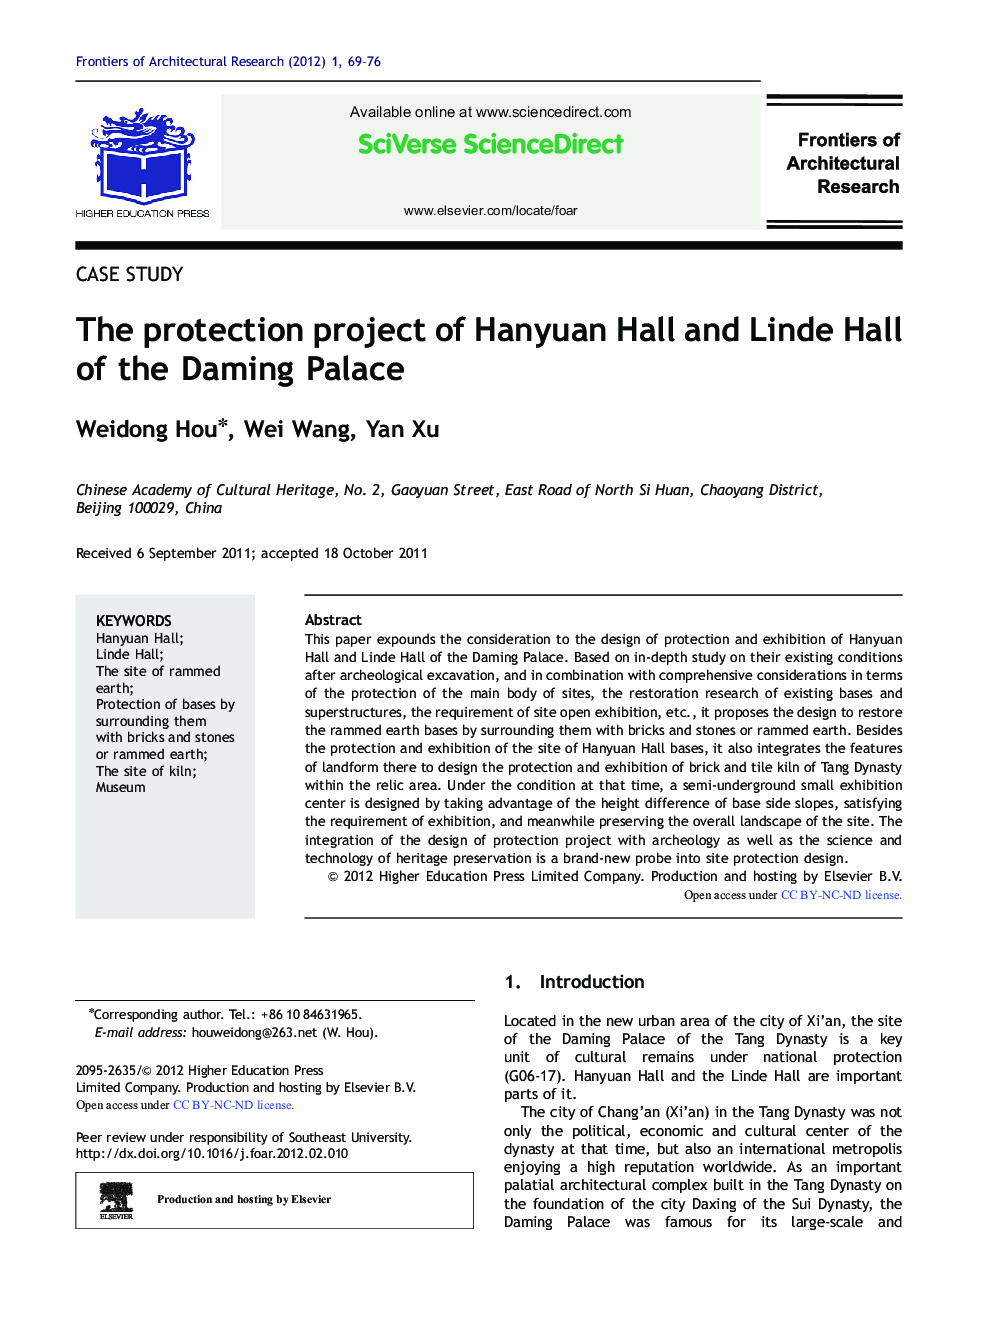 The protection project of Hanyuan Hall and Linde Hall of the Daming Palace